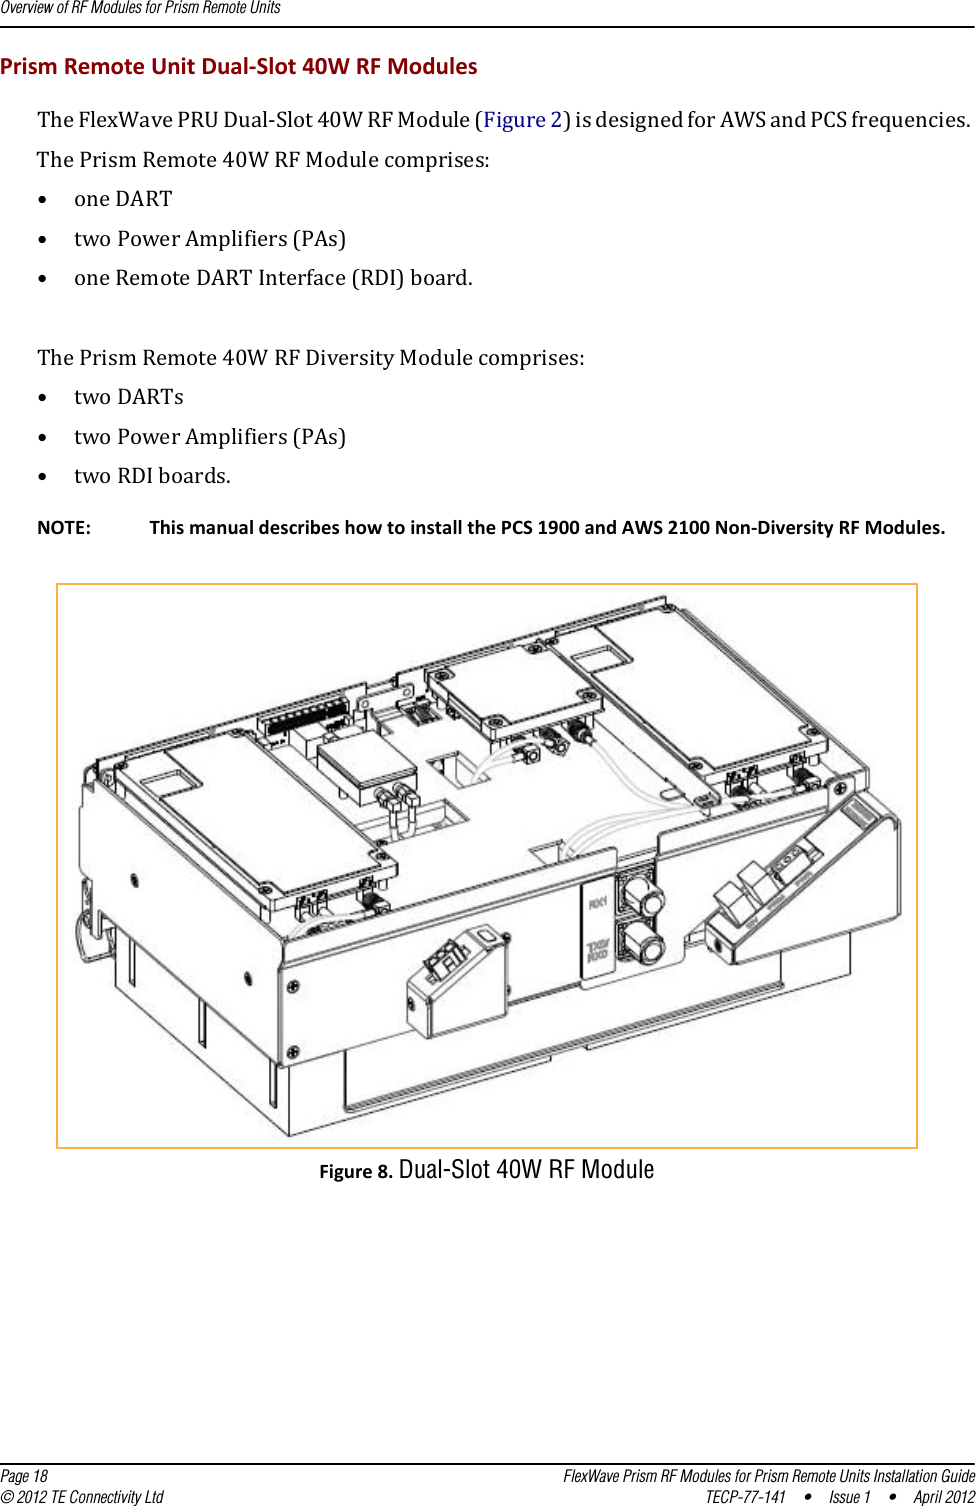 Overview of RF Modules for Prism Remote Units  Page 18 FlexWave Prism RF Modules for Prism Remote Units Installation Guide© 2012 TE Connectivity Ltd TECP-77-141 • Issue 1 • April 2012PrismRemoteUnitDual‐Slot40WRFModulesTheFlexWavePRUDual‐Slot40WRFModule(Figure2)isdesignedforAWSandPCSfrequencies.ThePrismRemote40WRFModulecomprises:•oneDART•twoPowerAmplifiers(PAs)•oneRemoteDARTInterface(RDI)board.ThePrismRemote40WRFDiversityModulecomprises:•twoDARTs•twoPowerAmplifiers(PAs)•twoRDIboards.NOTE: ThismanualdescribeshowtoinstallthePCS1900andAWS2100Non‐DiversityRFModules.Figure8.Dual-Slot 40W RF Module